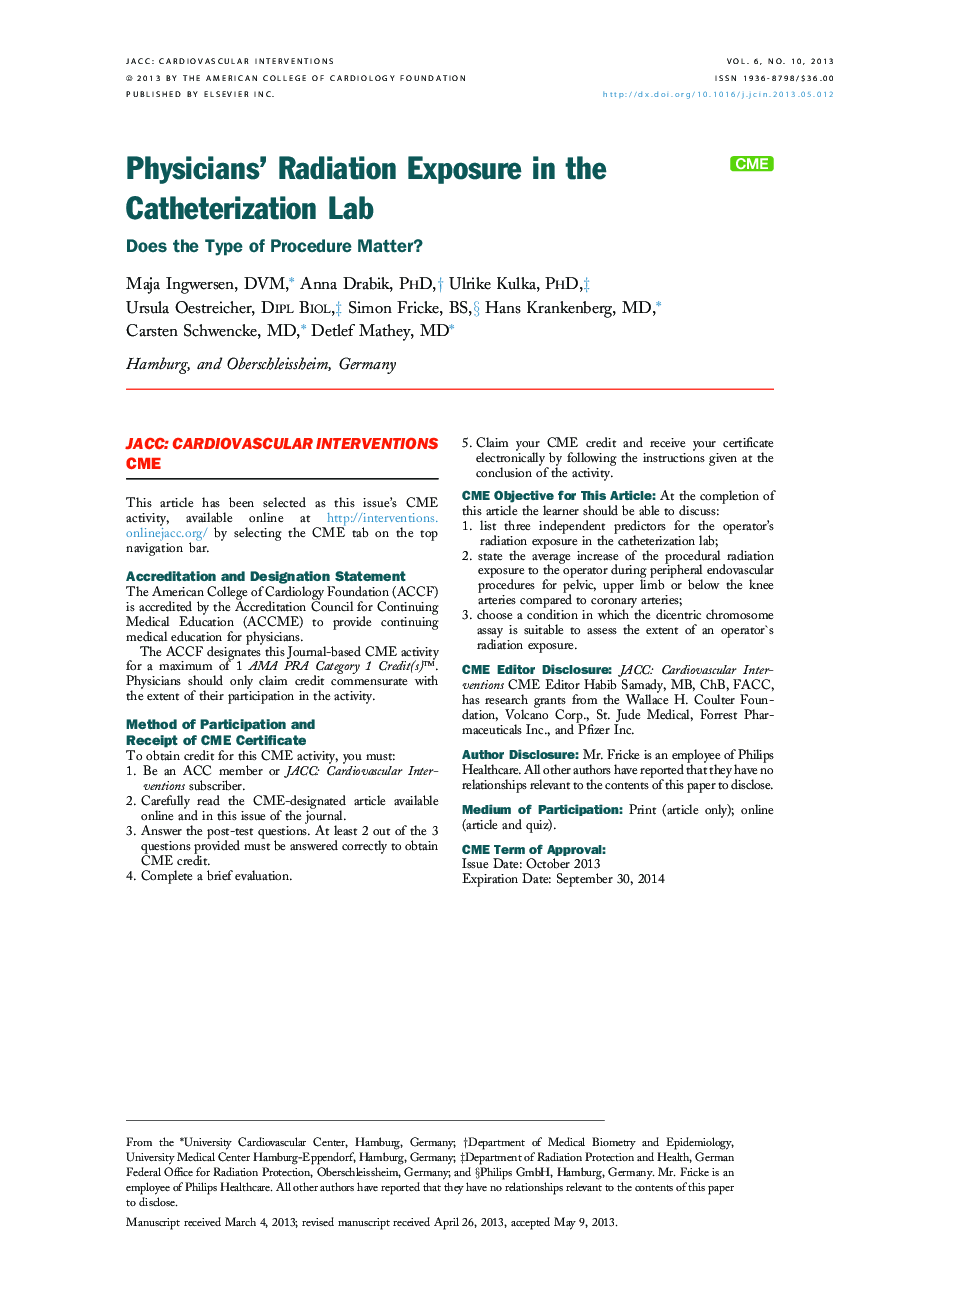 Physicians' Radiation Exposure in the Catheterization Lab : Does the Type of Procedure Matter?